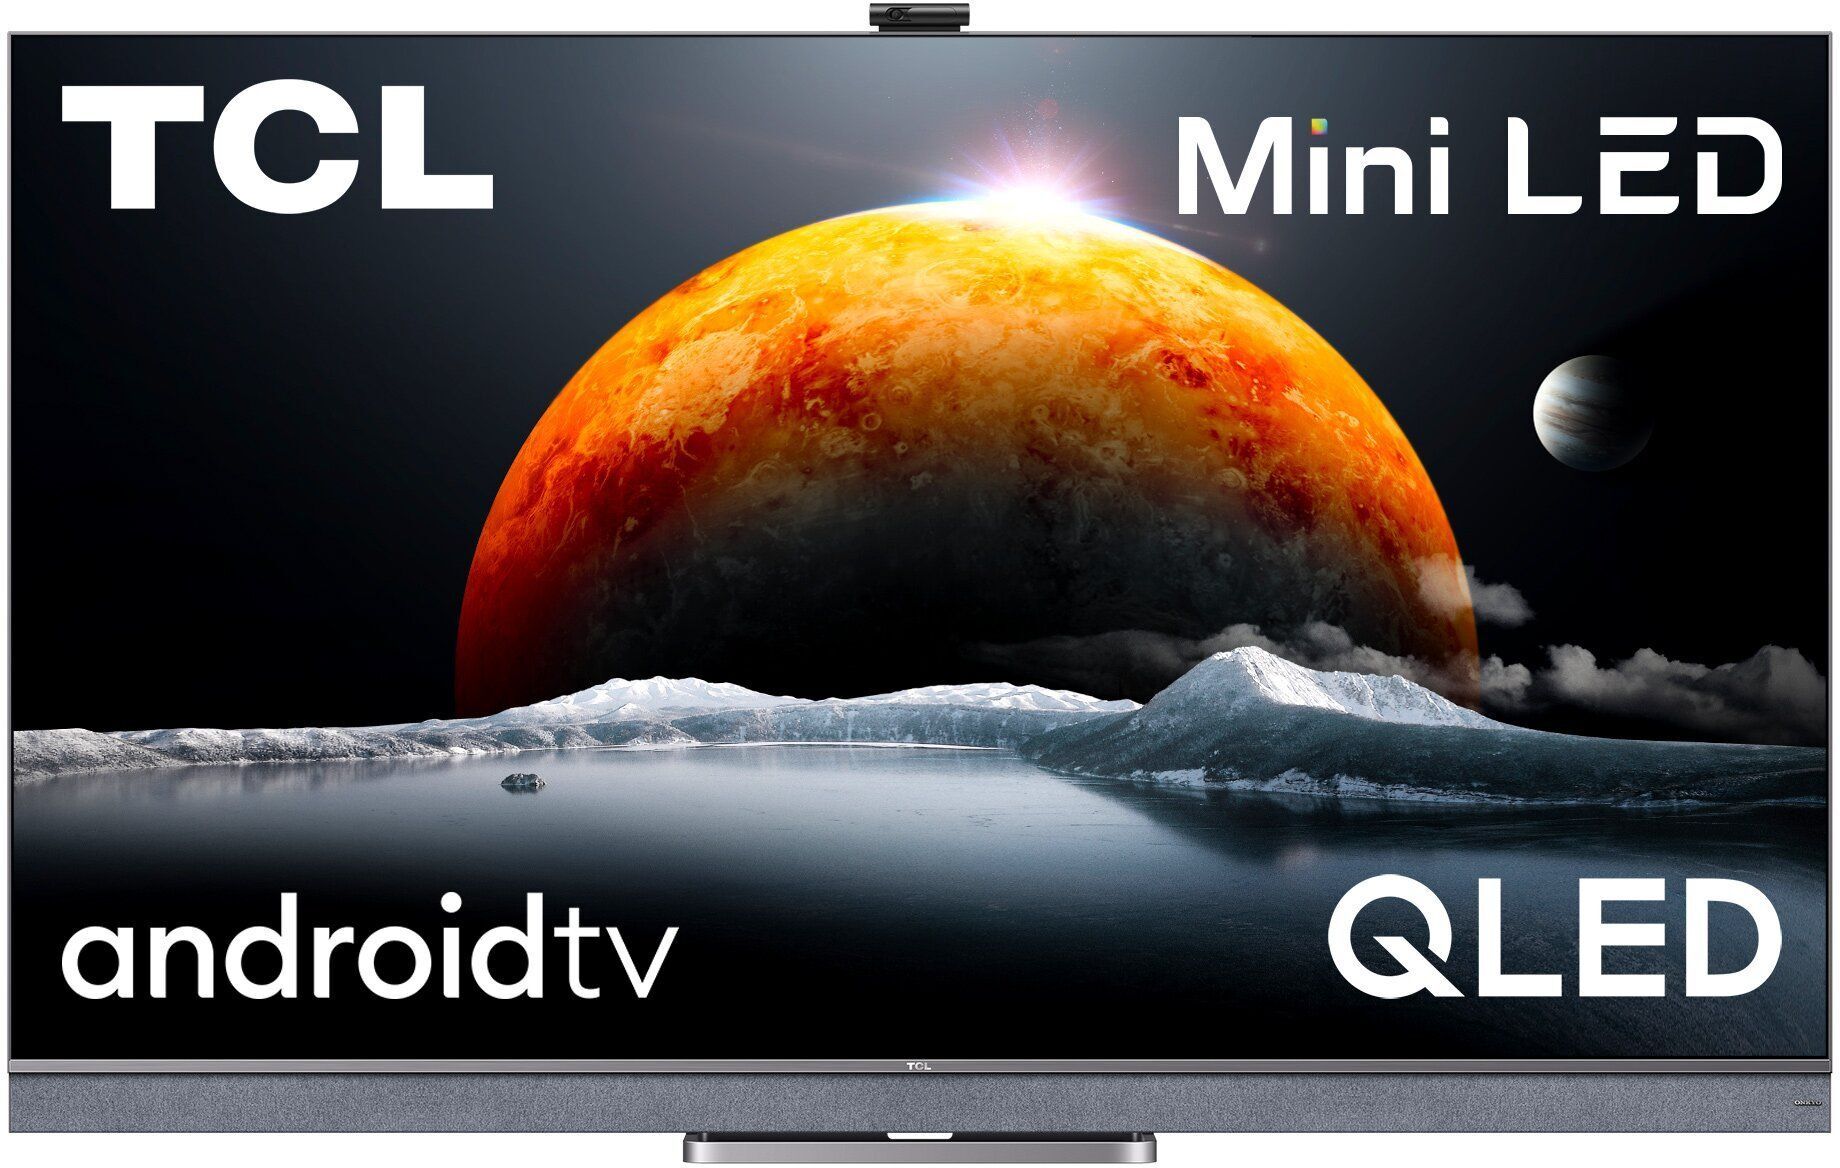 TCL C825